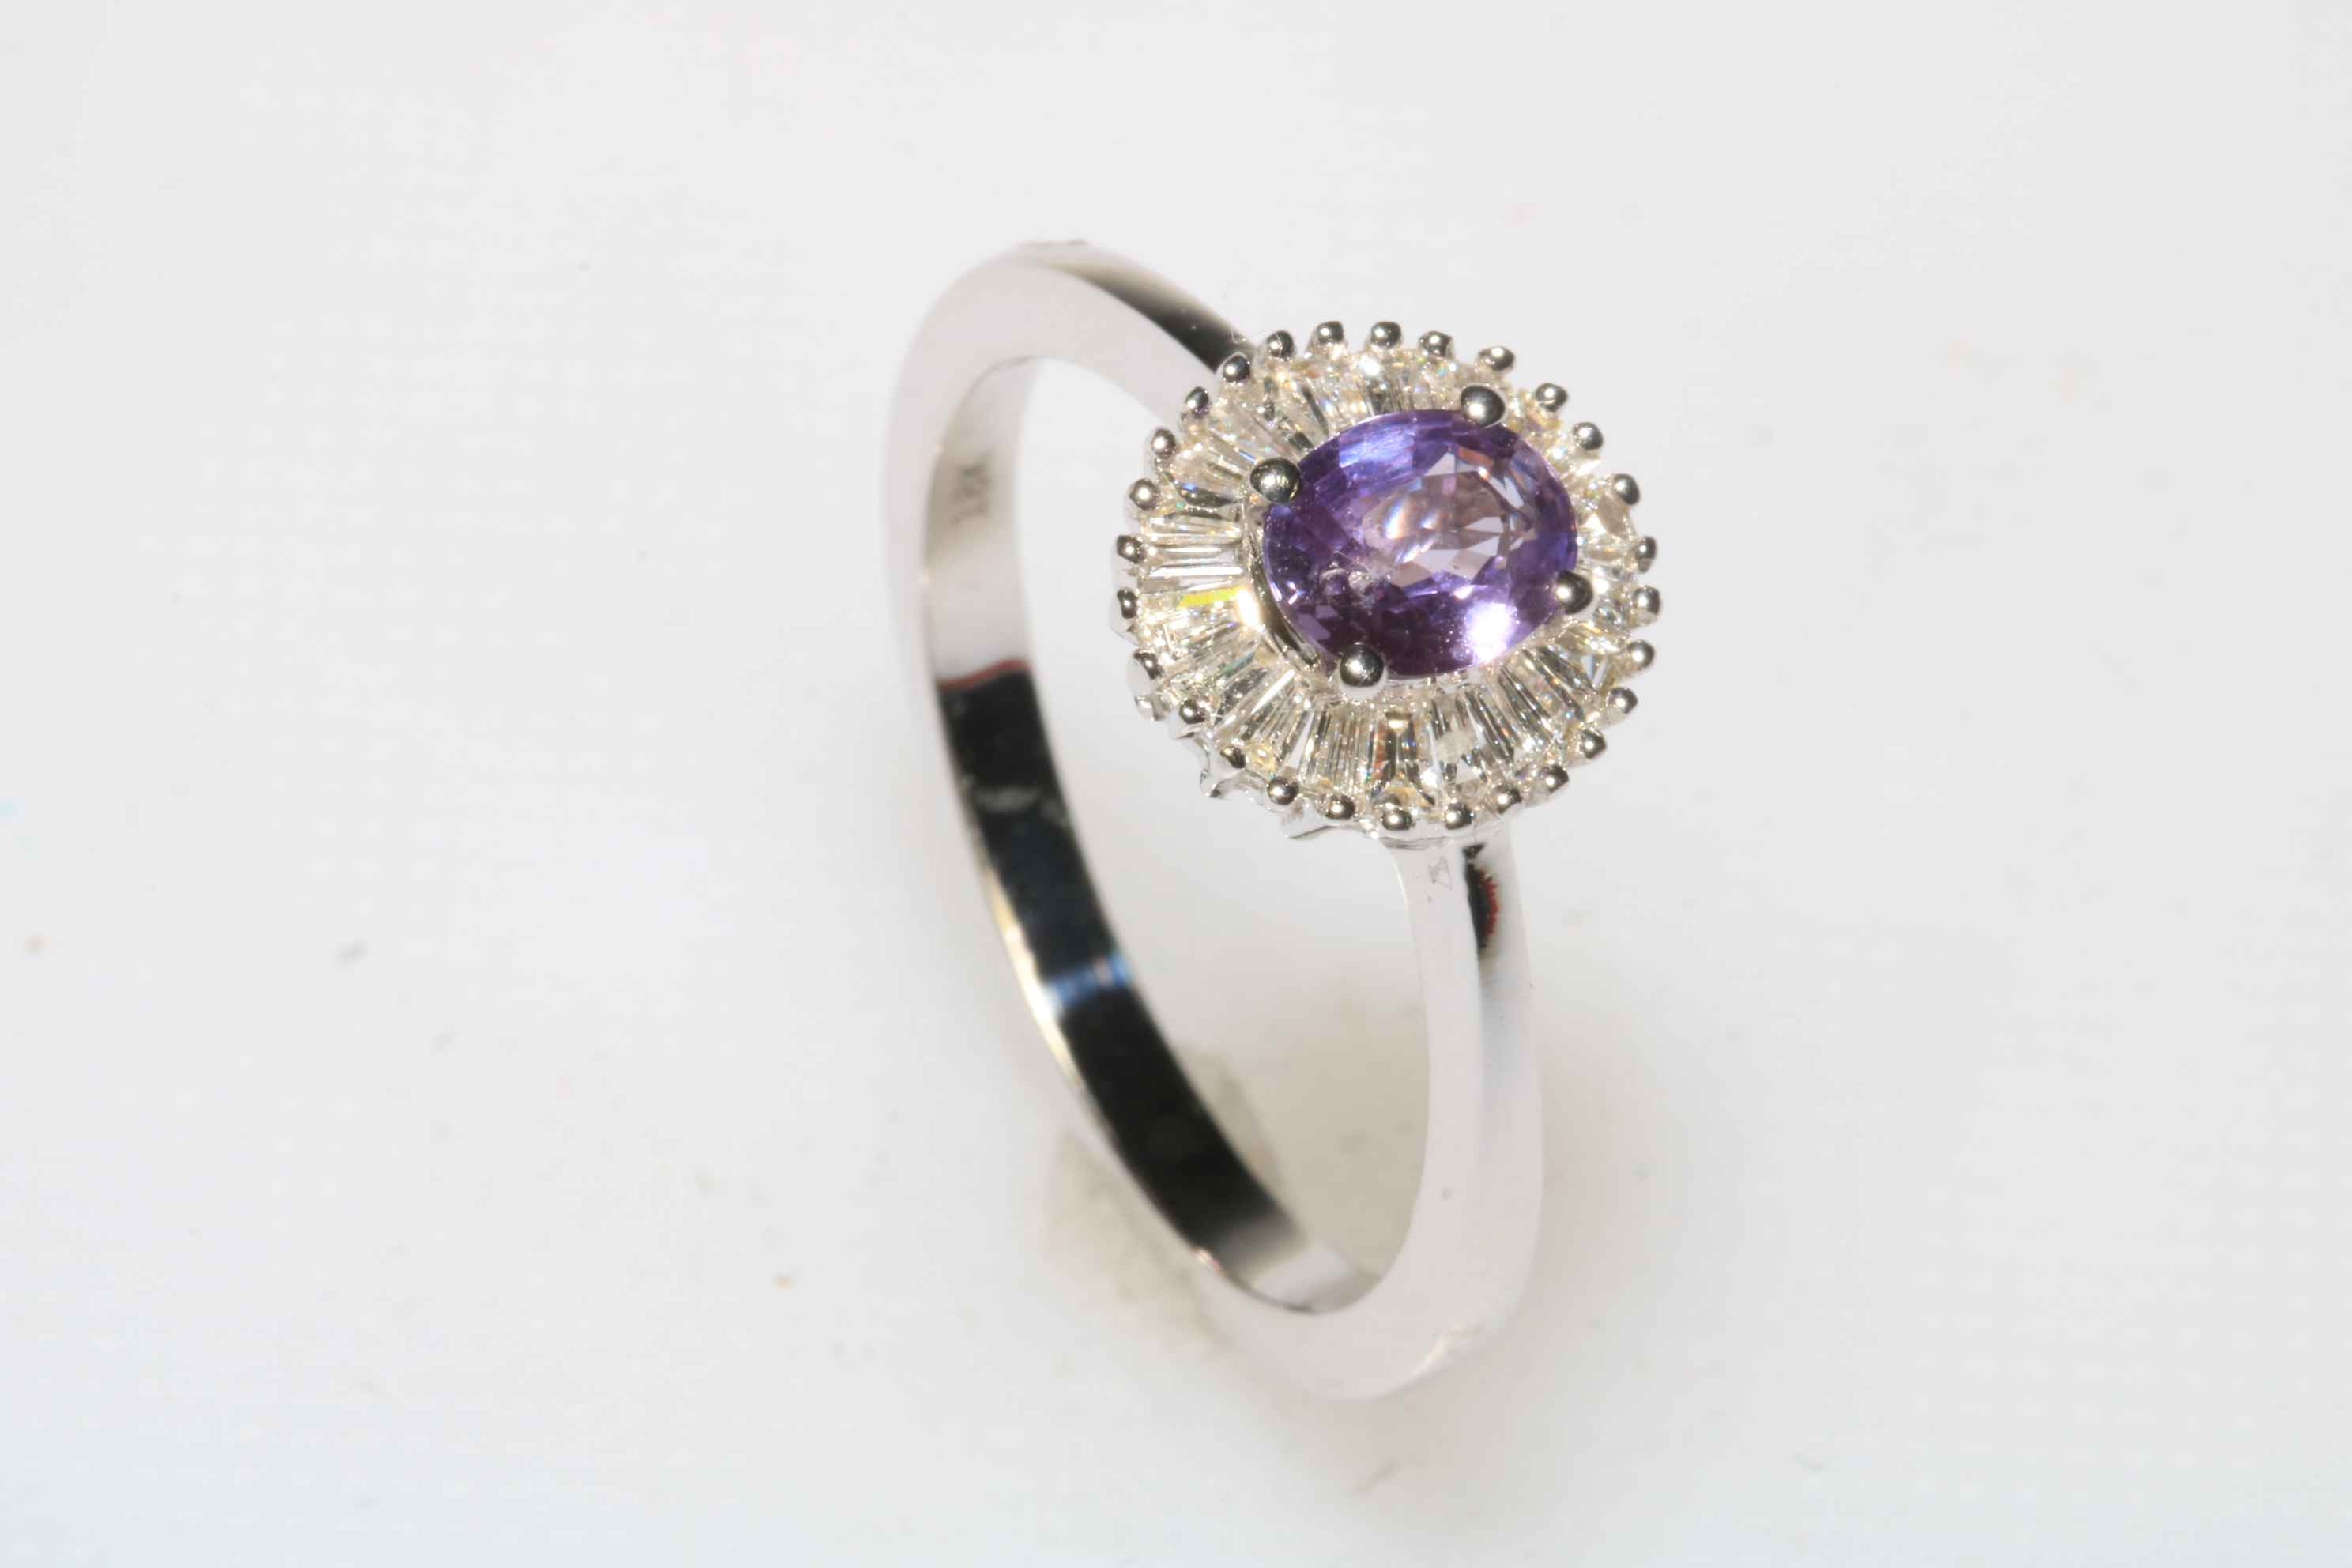 Purple sapphire and diamond 18 carat white gold ring, size R, with certificate.